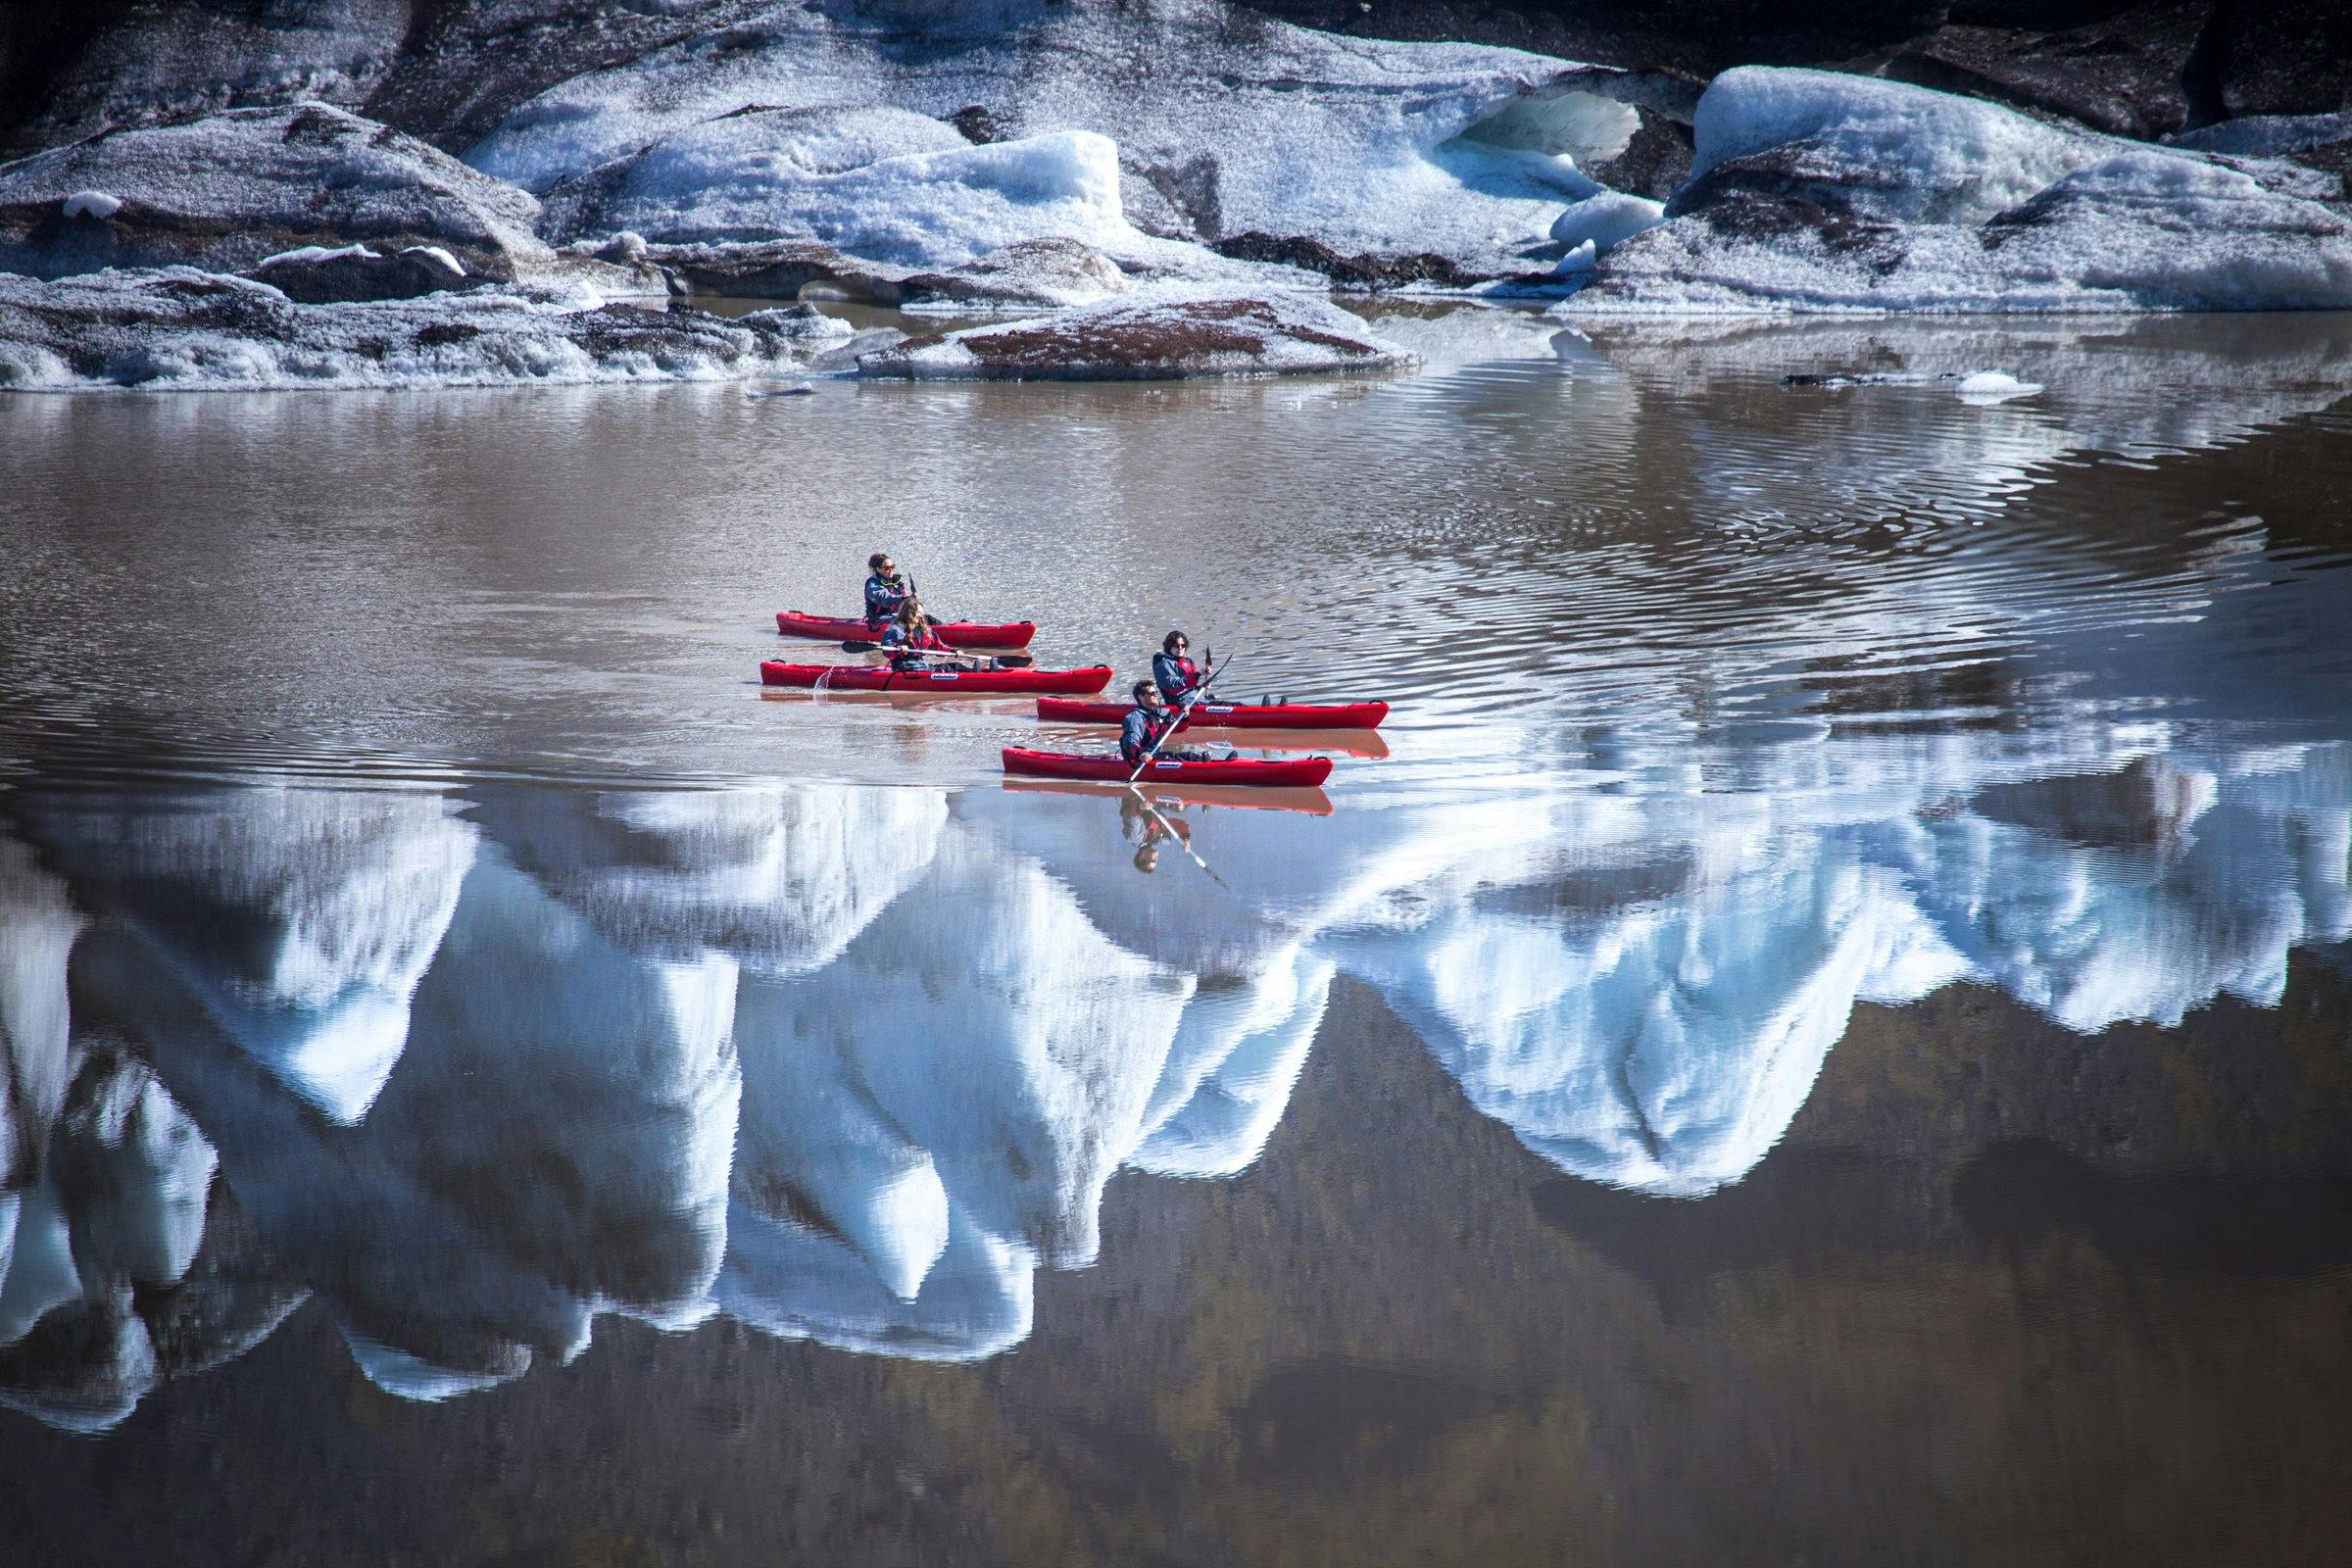 Kayaking in the Svínafell glacier lagoon